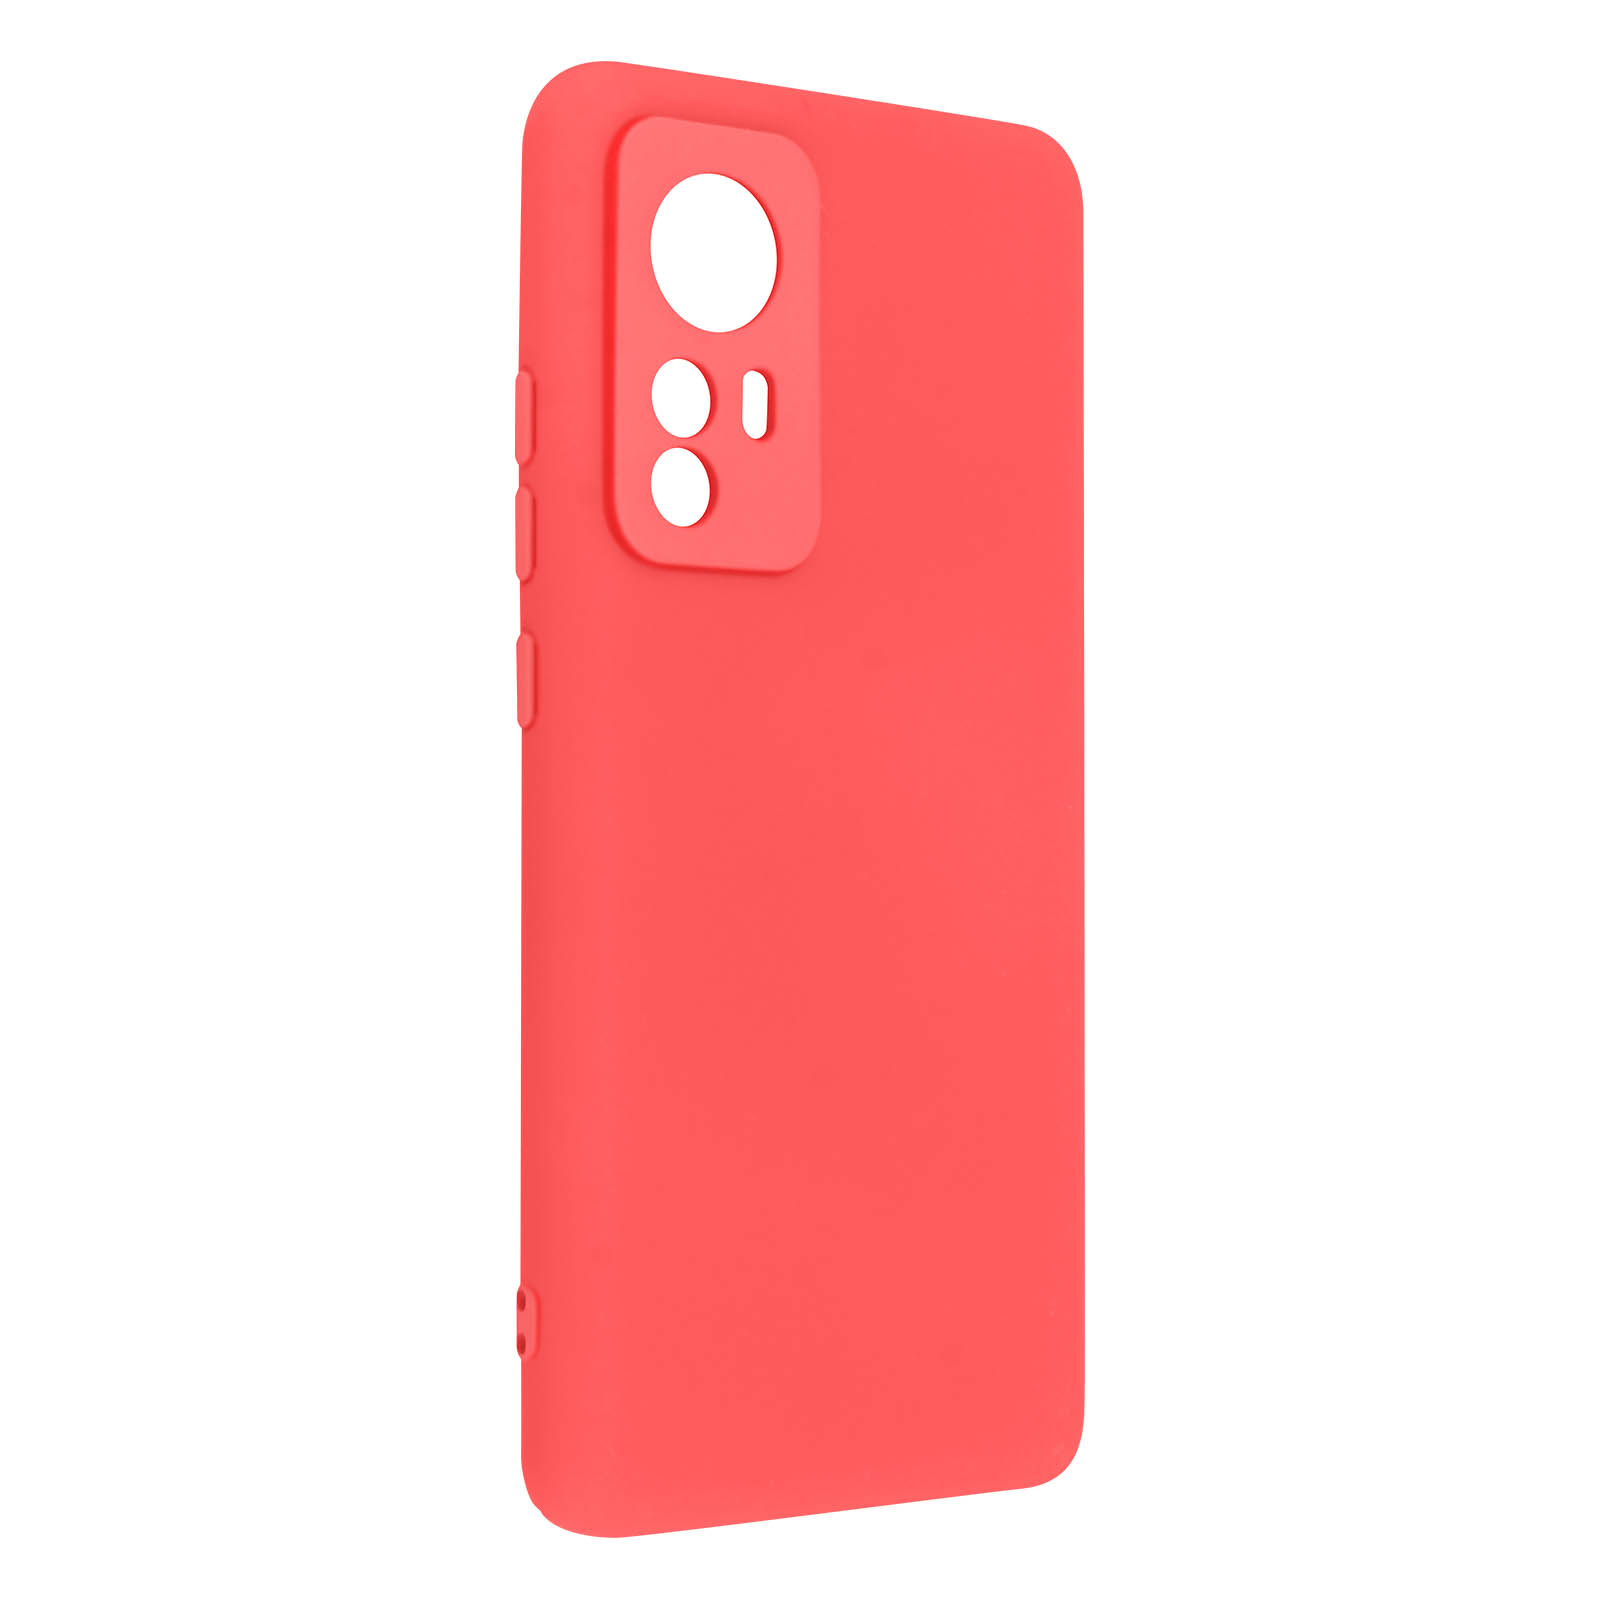 Pro, 12T Backcover, Soft AVIZAR Touch Xiaomi, Series, Fuchsienrot